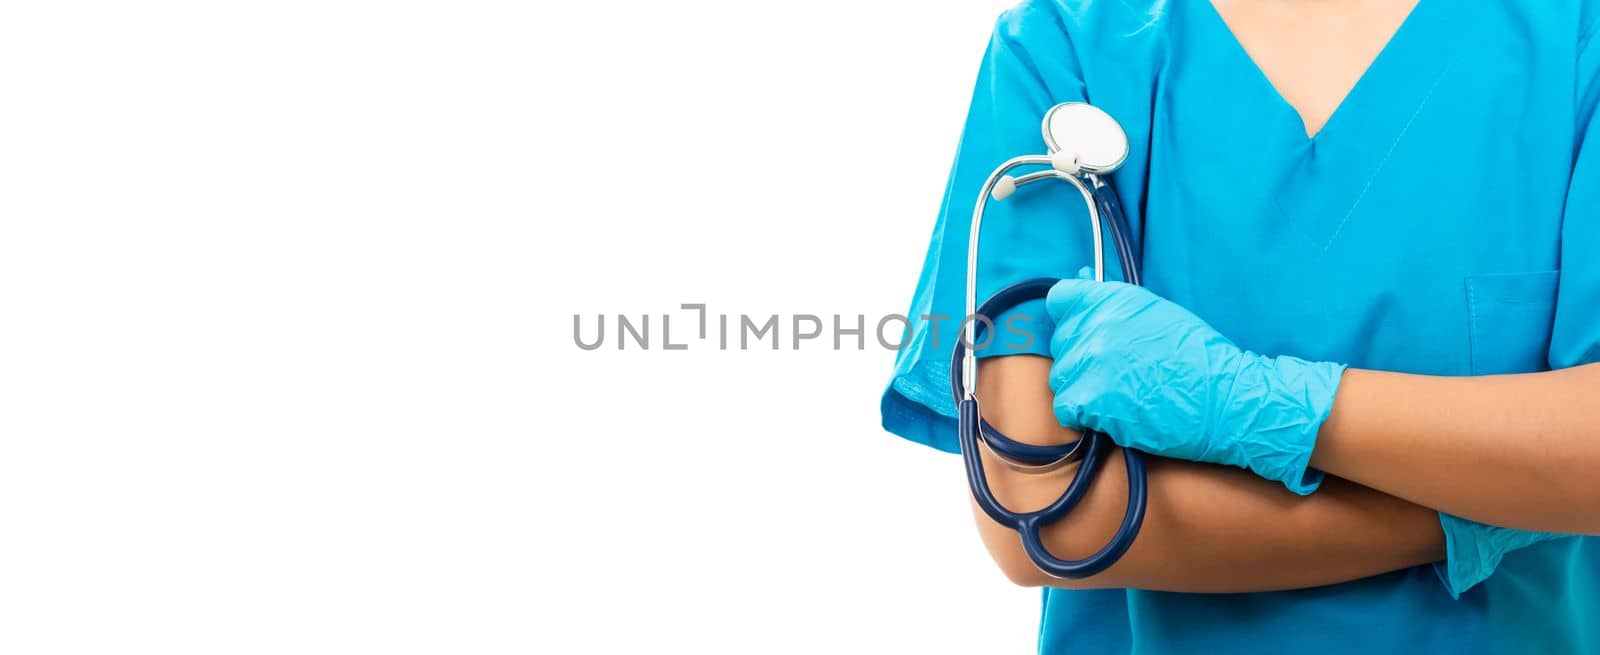 Doctor Day. Female nurse with stethoscope puts on rubber gloves and wearing medical face mask, woman doctor in blue uniform crossed arms, isolated on over white background, medical health concept